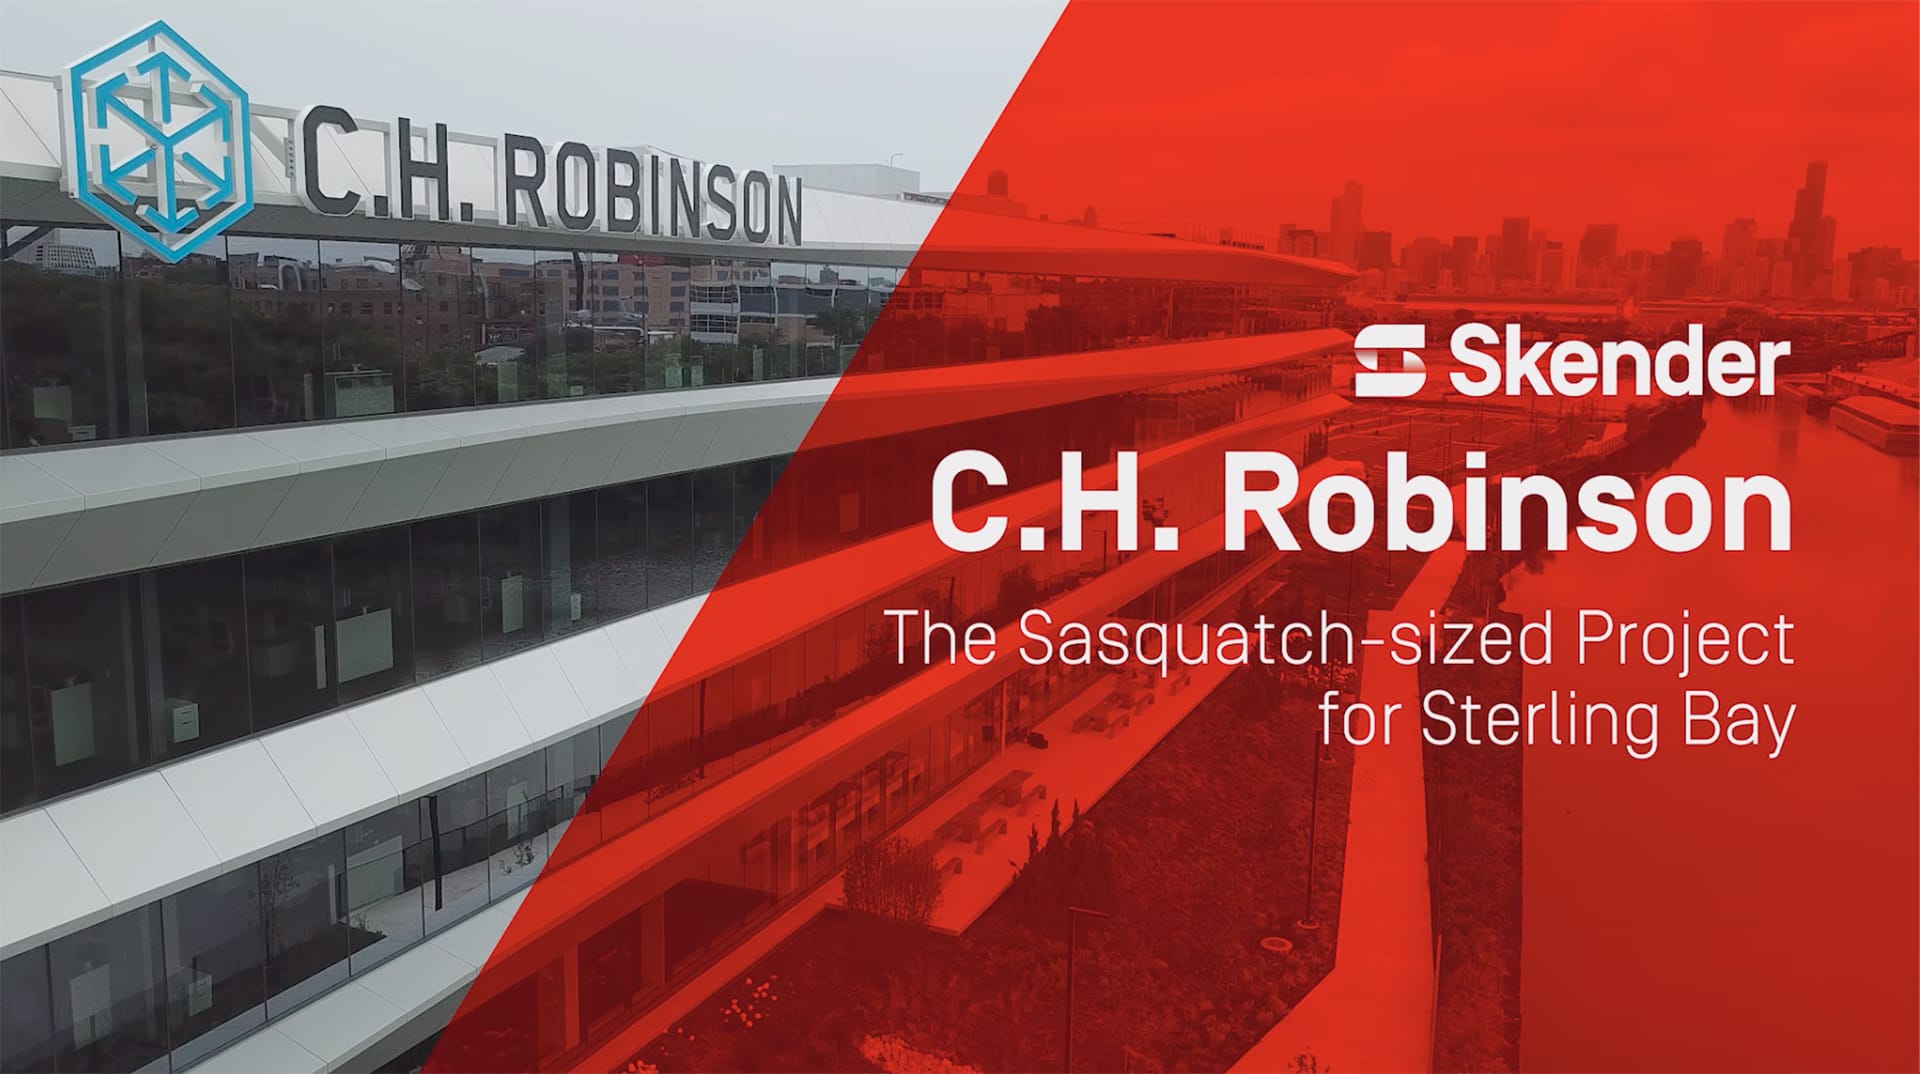 C.H. Robinson – The Sasquatch-sized Sterling Bay Project